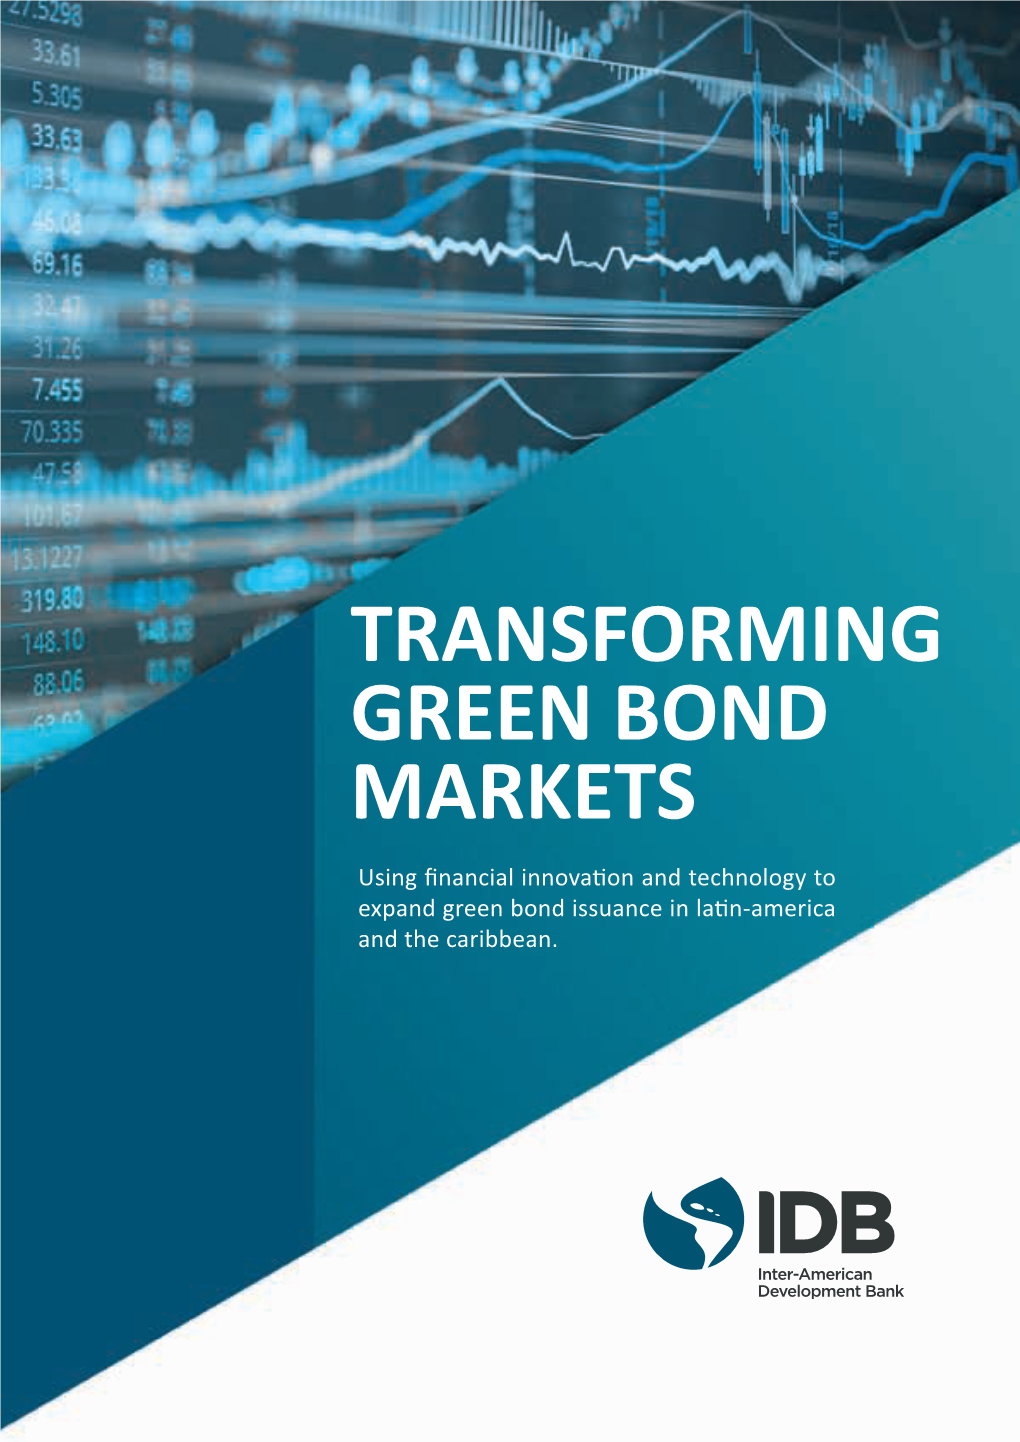 TRANSFORMING GREEN BOND MARKETS Using Financial Innovation and Technology to Expand Green Bond Issuance in Latin-America and the Caribbean